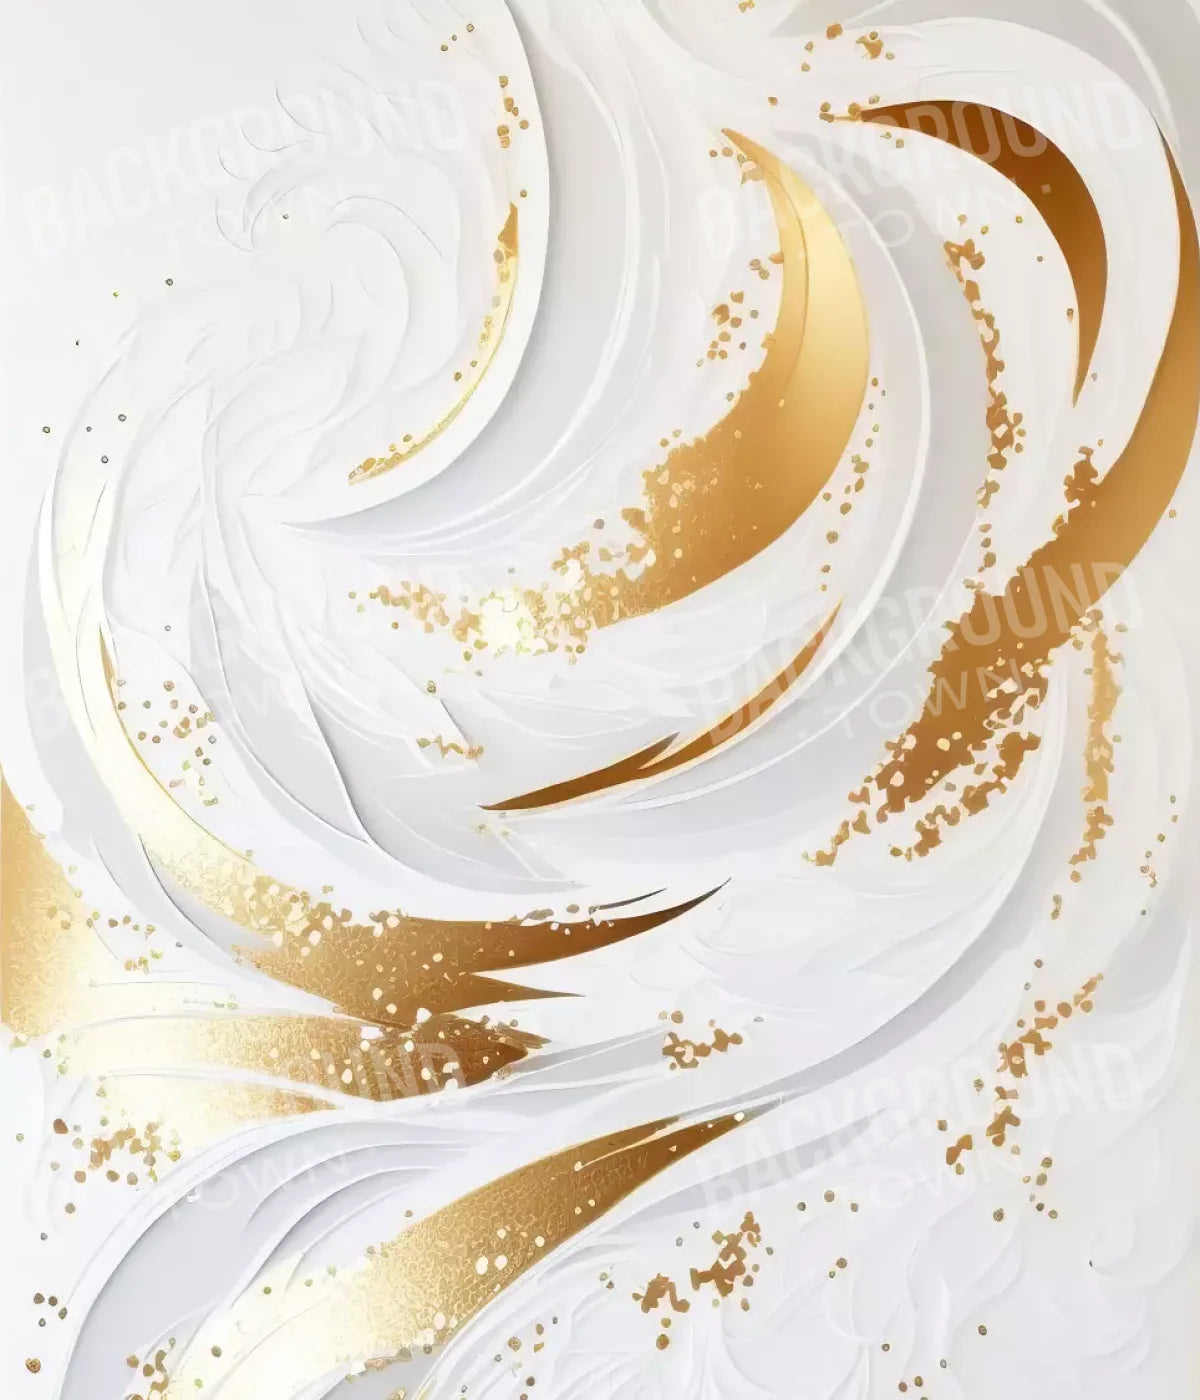 Abstract Swirl In White And Gold 10X12 Ultracloth ( 120 X 144 Inch ) Backdrop